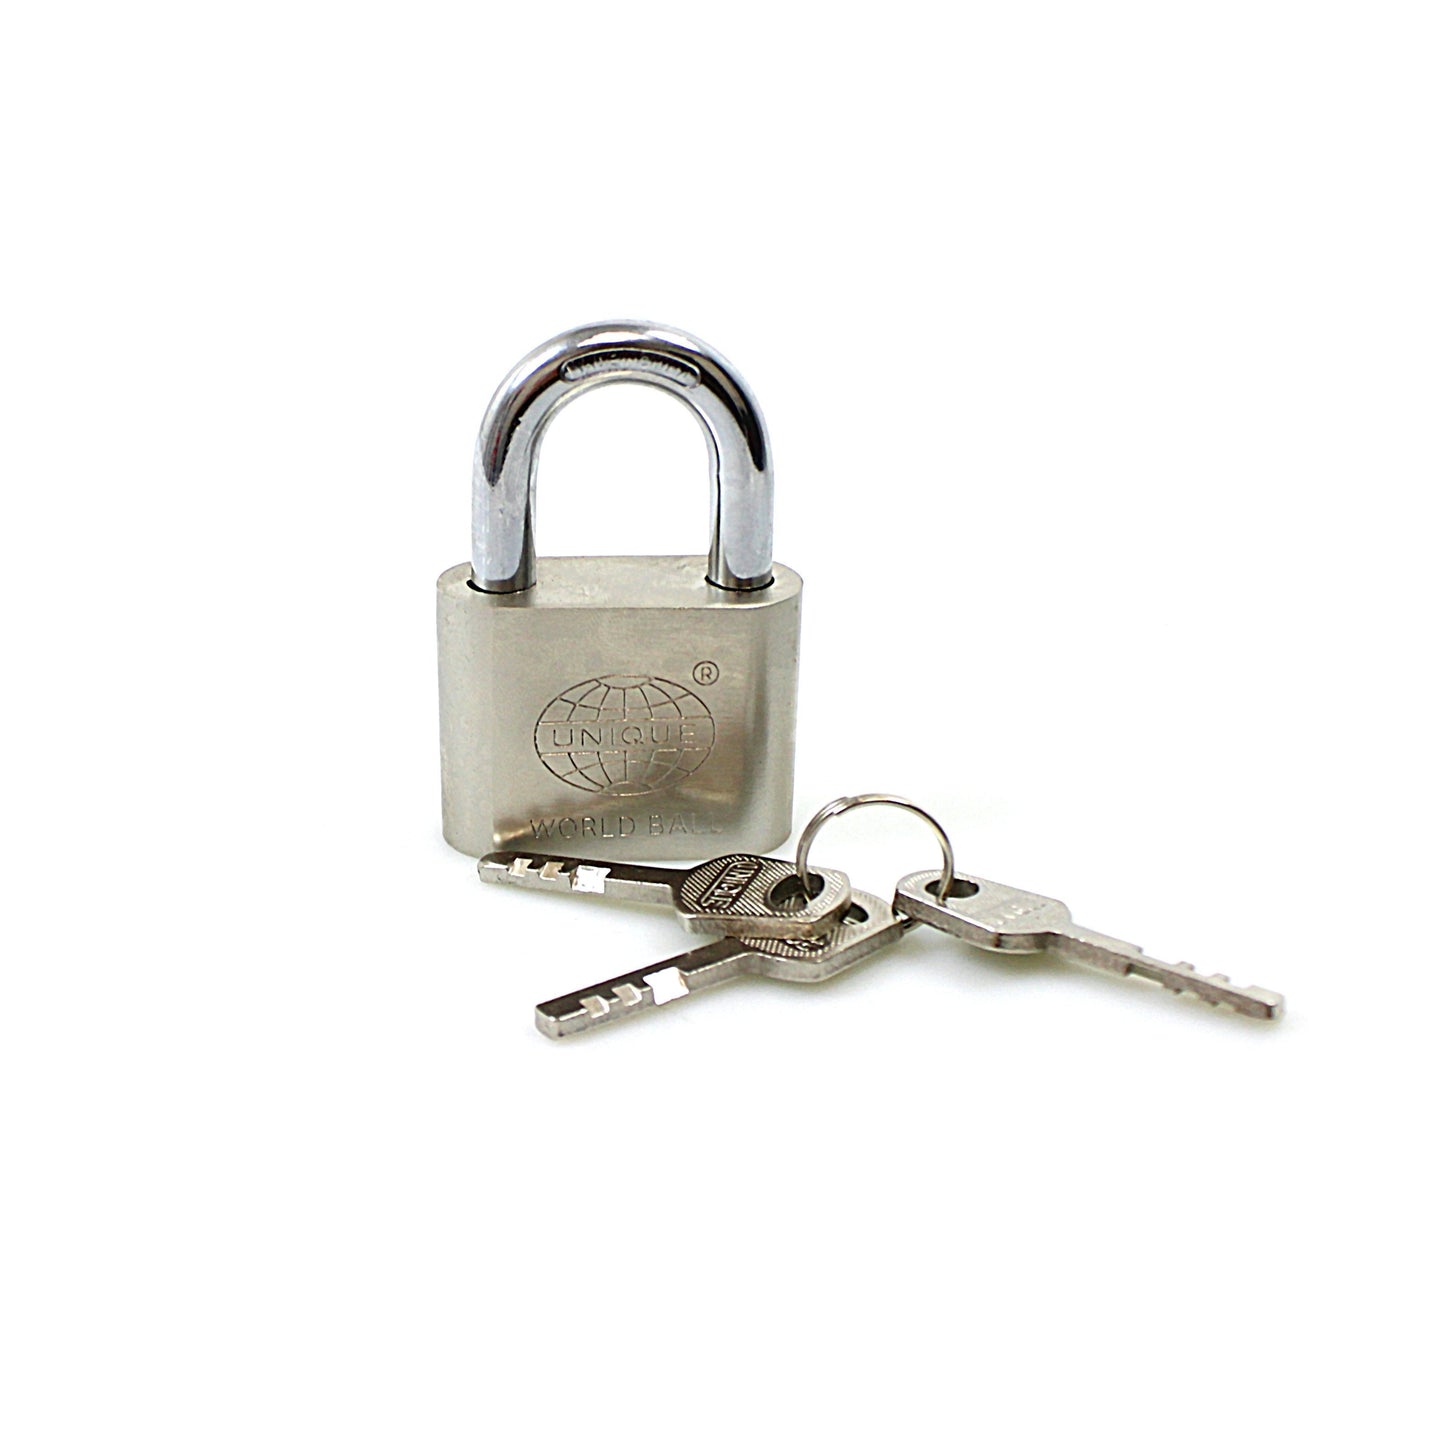 50mm World Ball Lock High Security With 3 Keys Chrome 0246 (Large Letter Rate)